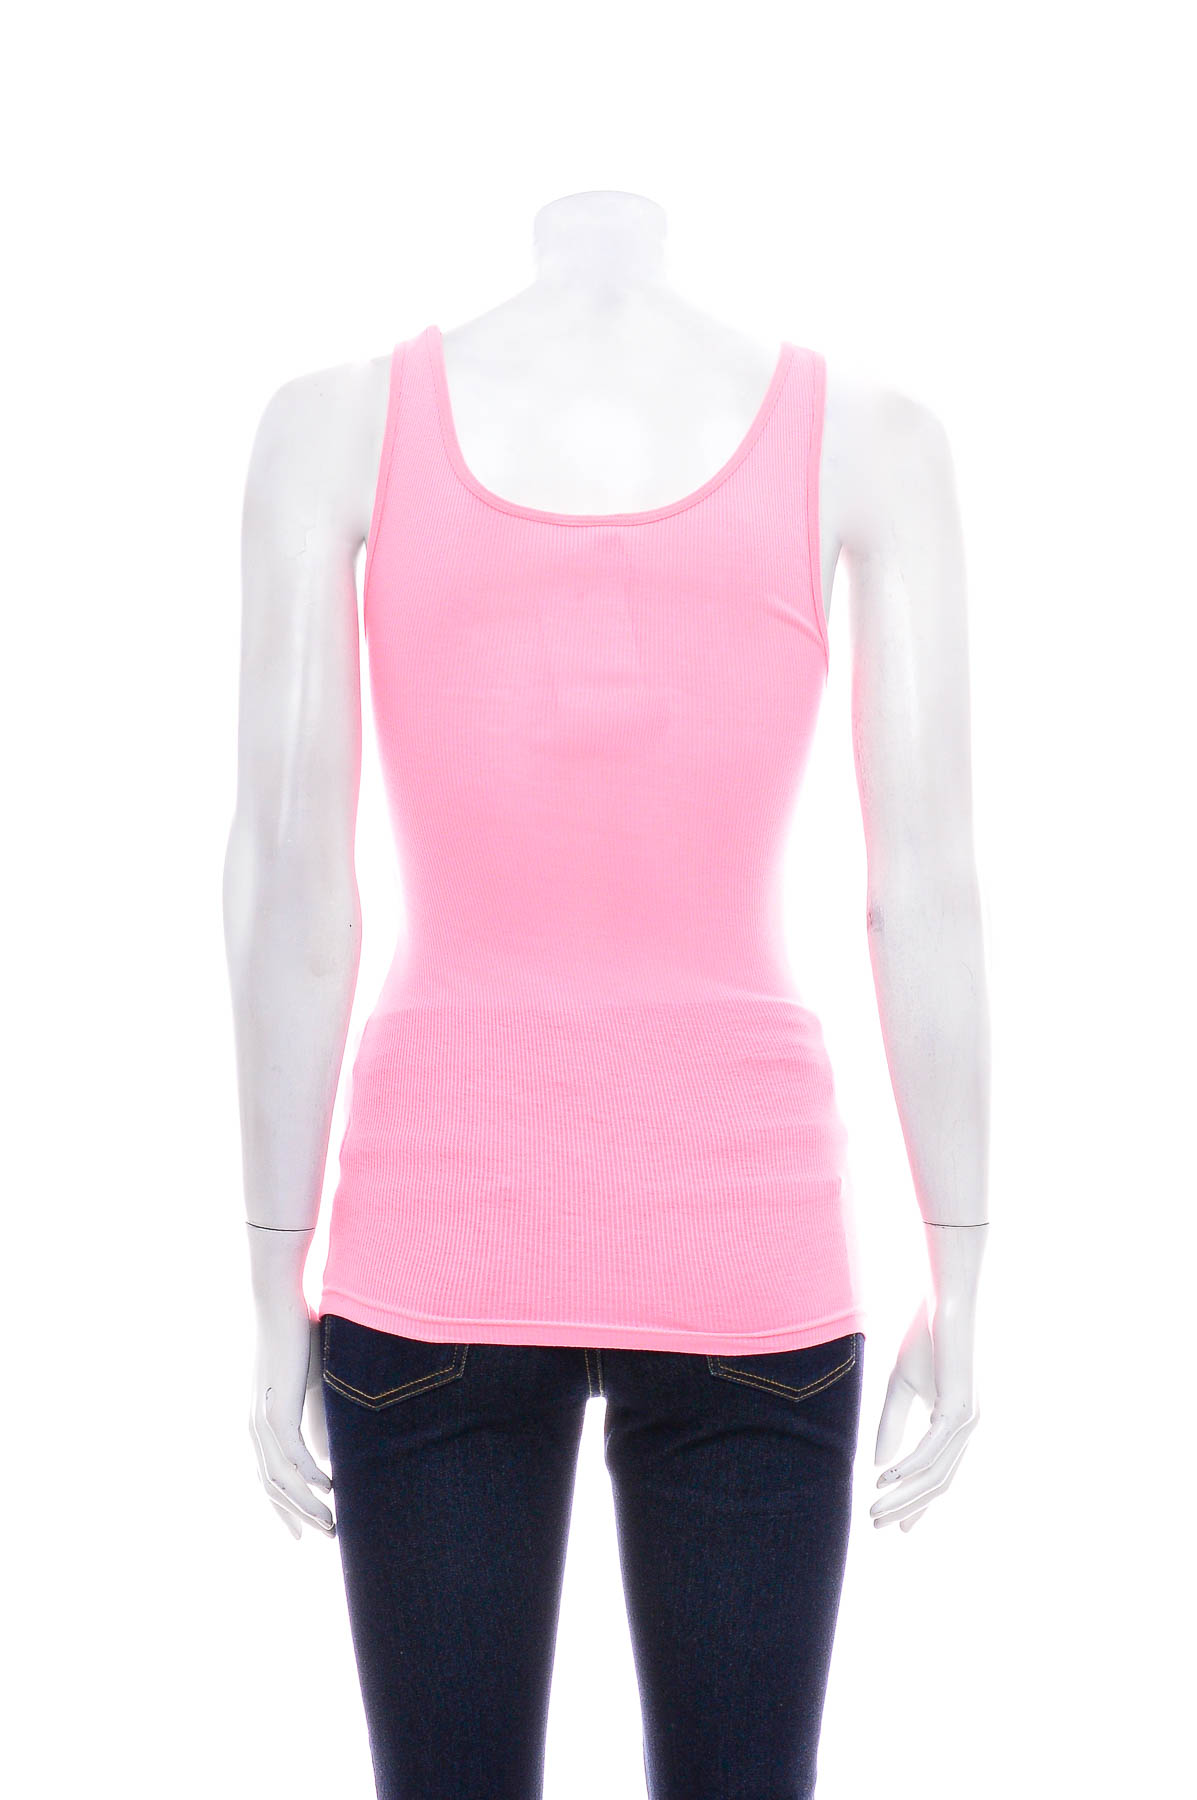 Women's top - DIVIDED - 1